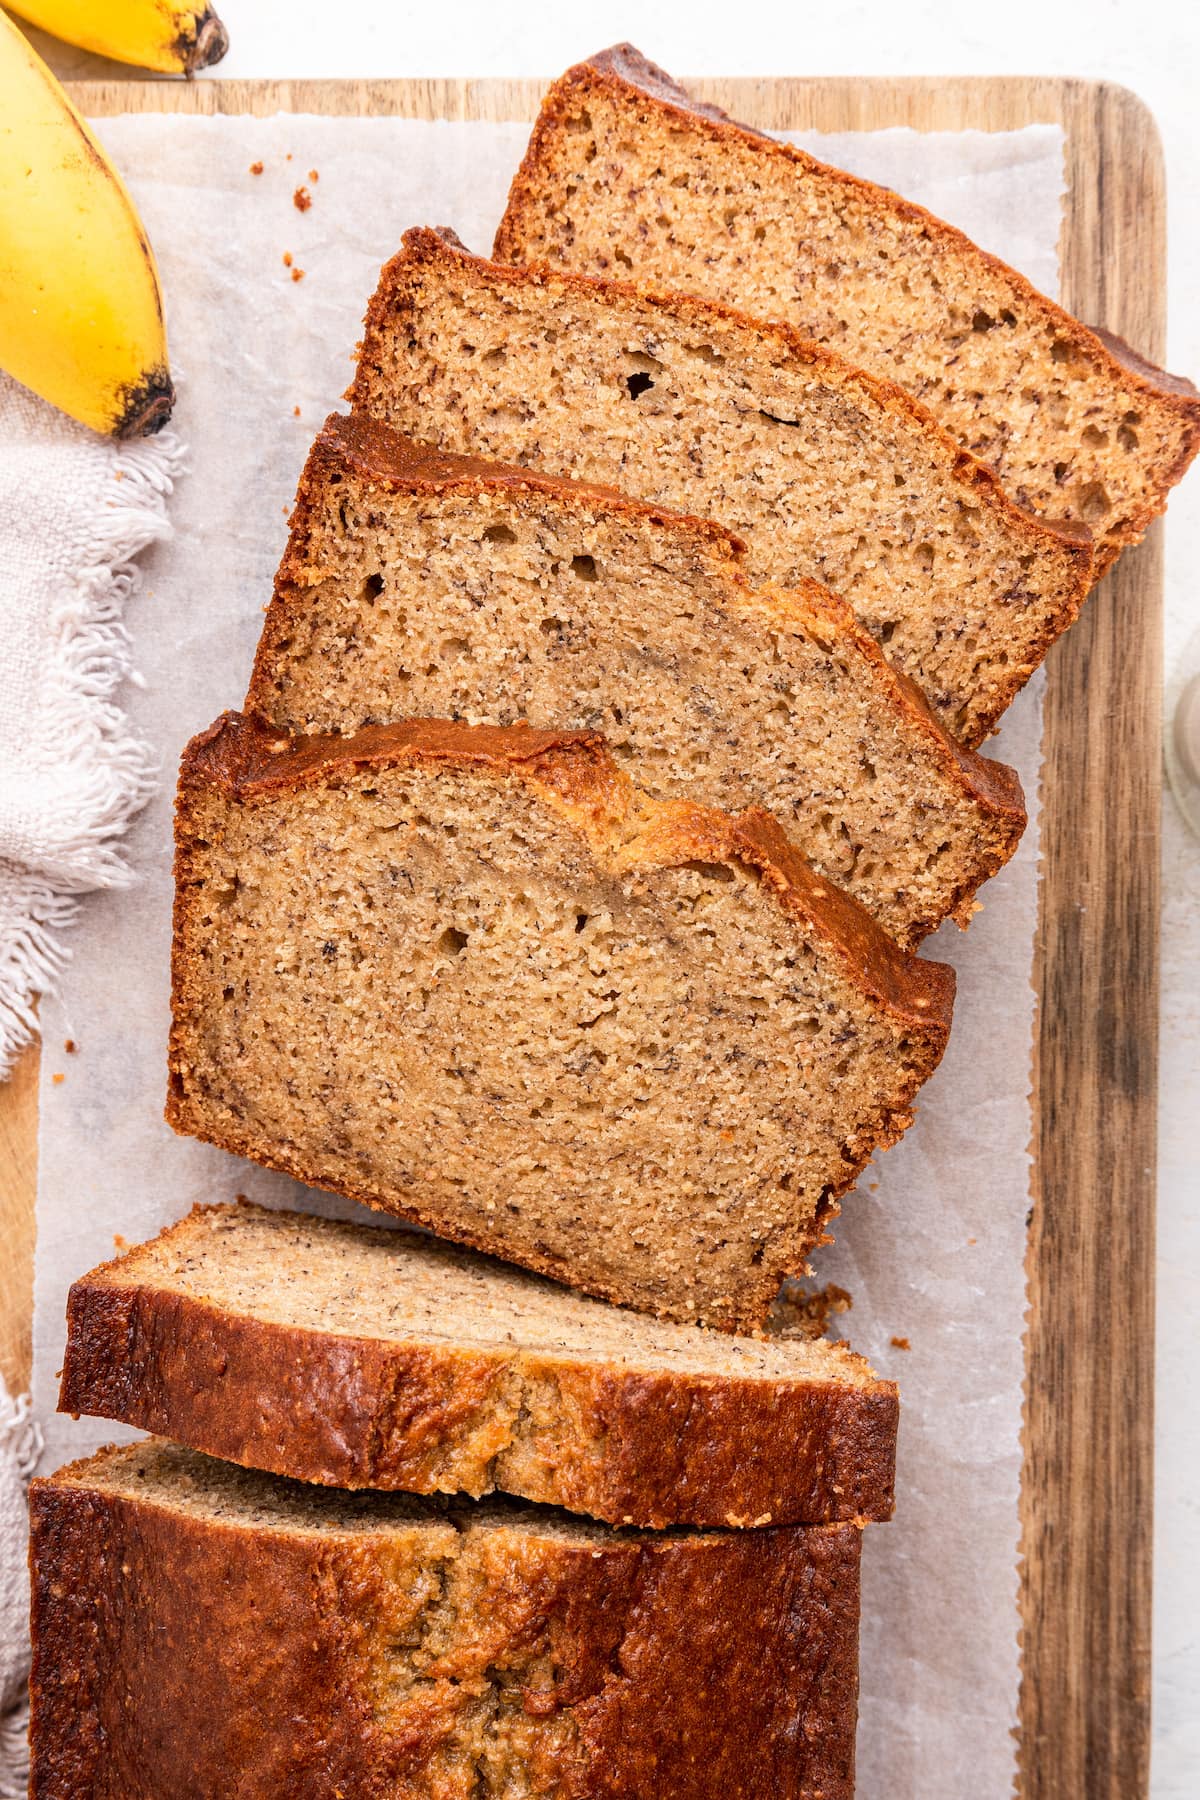 Four slices of banana bread leaning against one another on a wooden board.